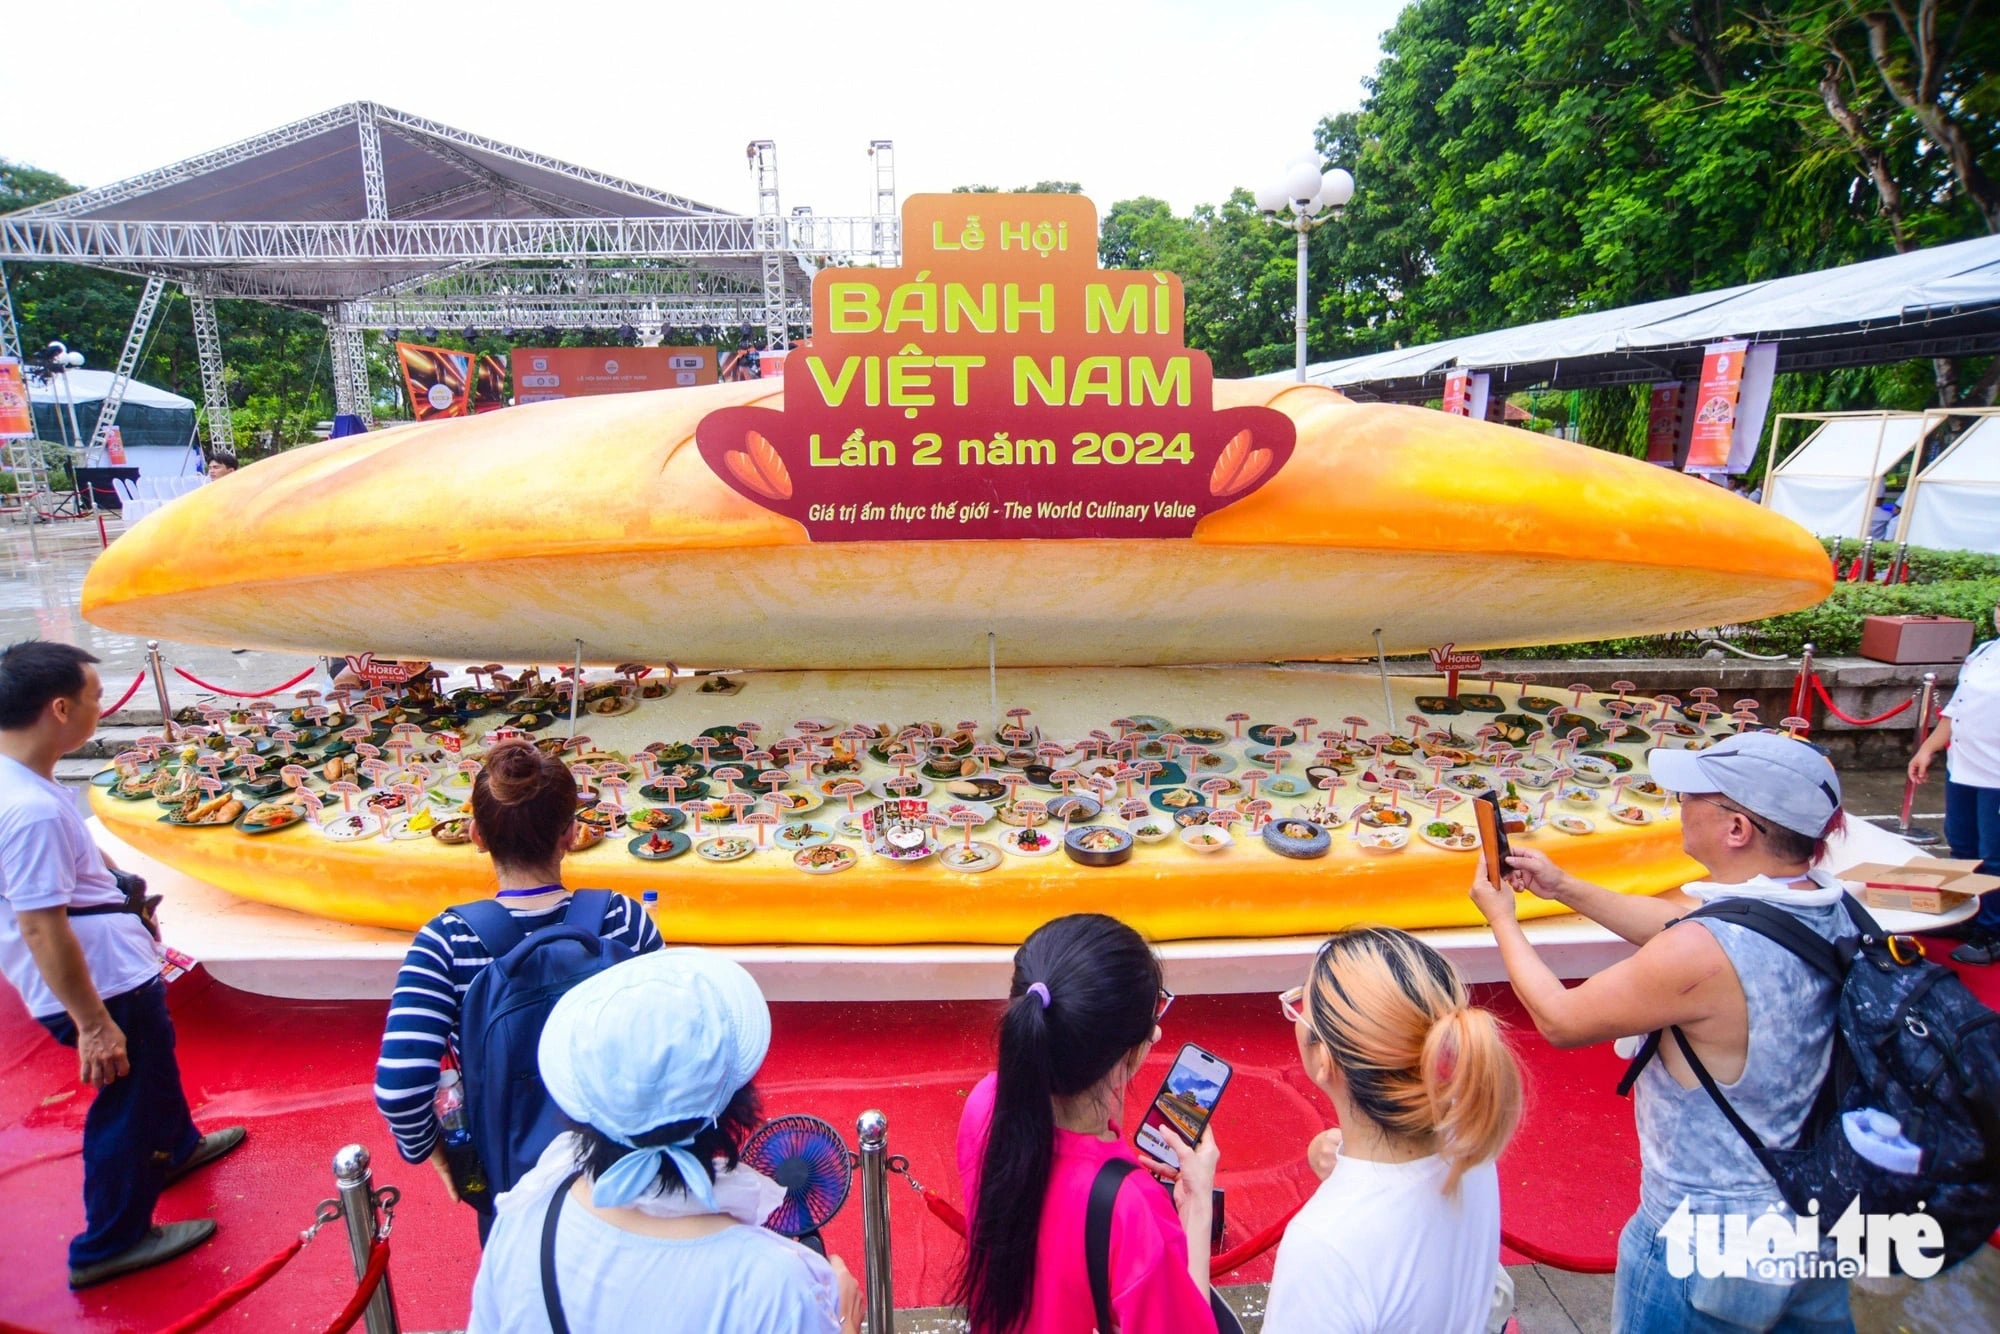 A display of a giant Vietnamese baguette with 150 types of fillings and side dishes attract both Vietnamese and foreign visitors at the Vietnam Banh Mi Festival at Le Van Tam Park in District 1, Ho Chi Minh City on May 17. Photo: Quang Dinh / Tuoi Tre